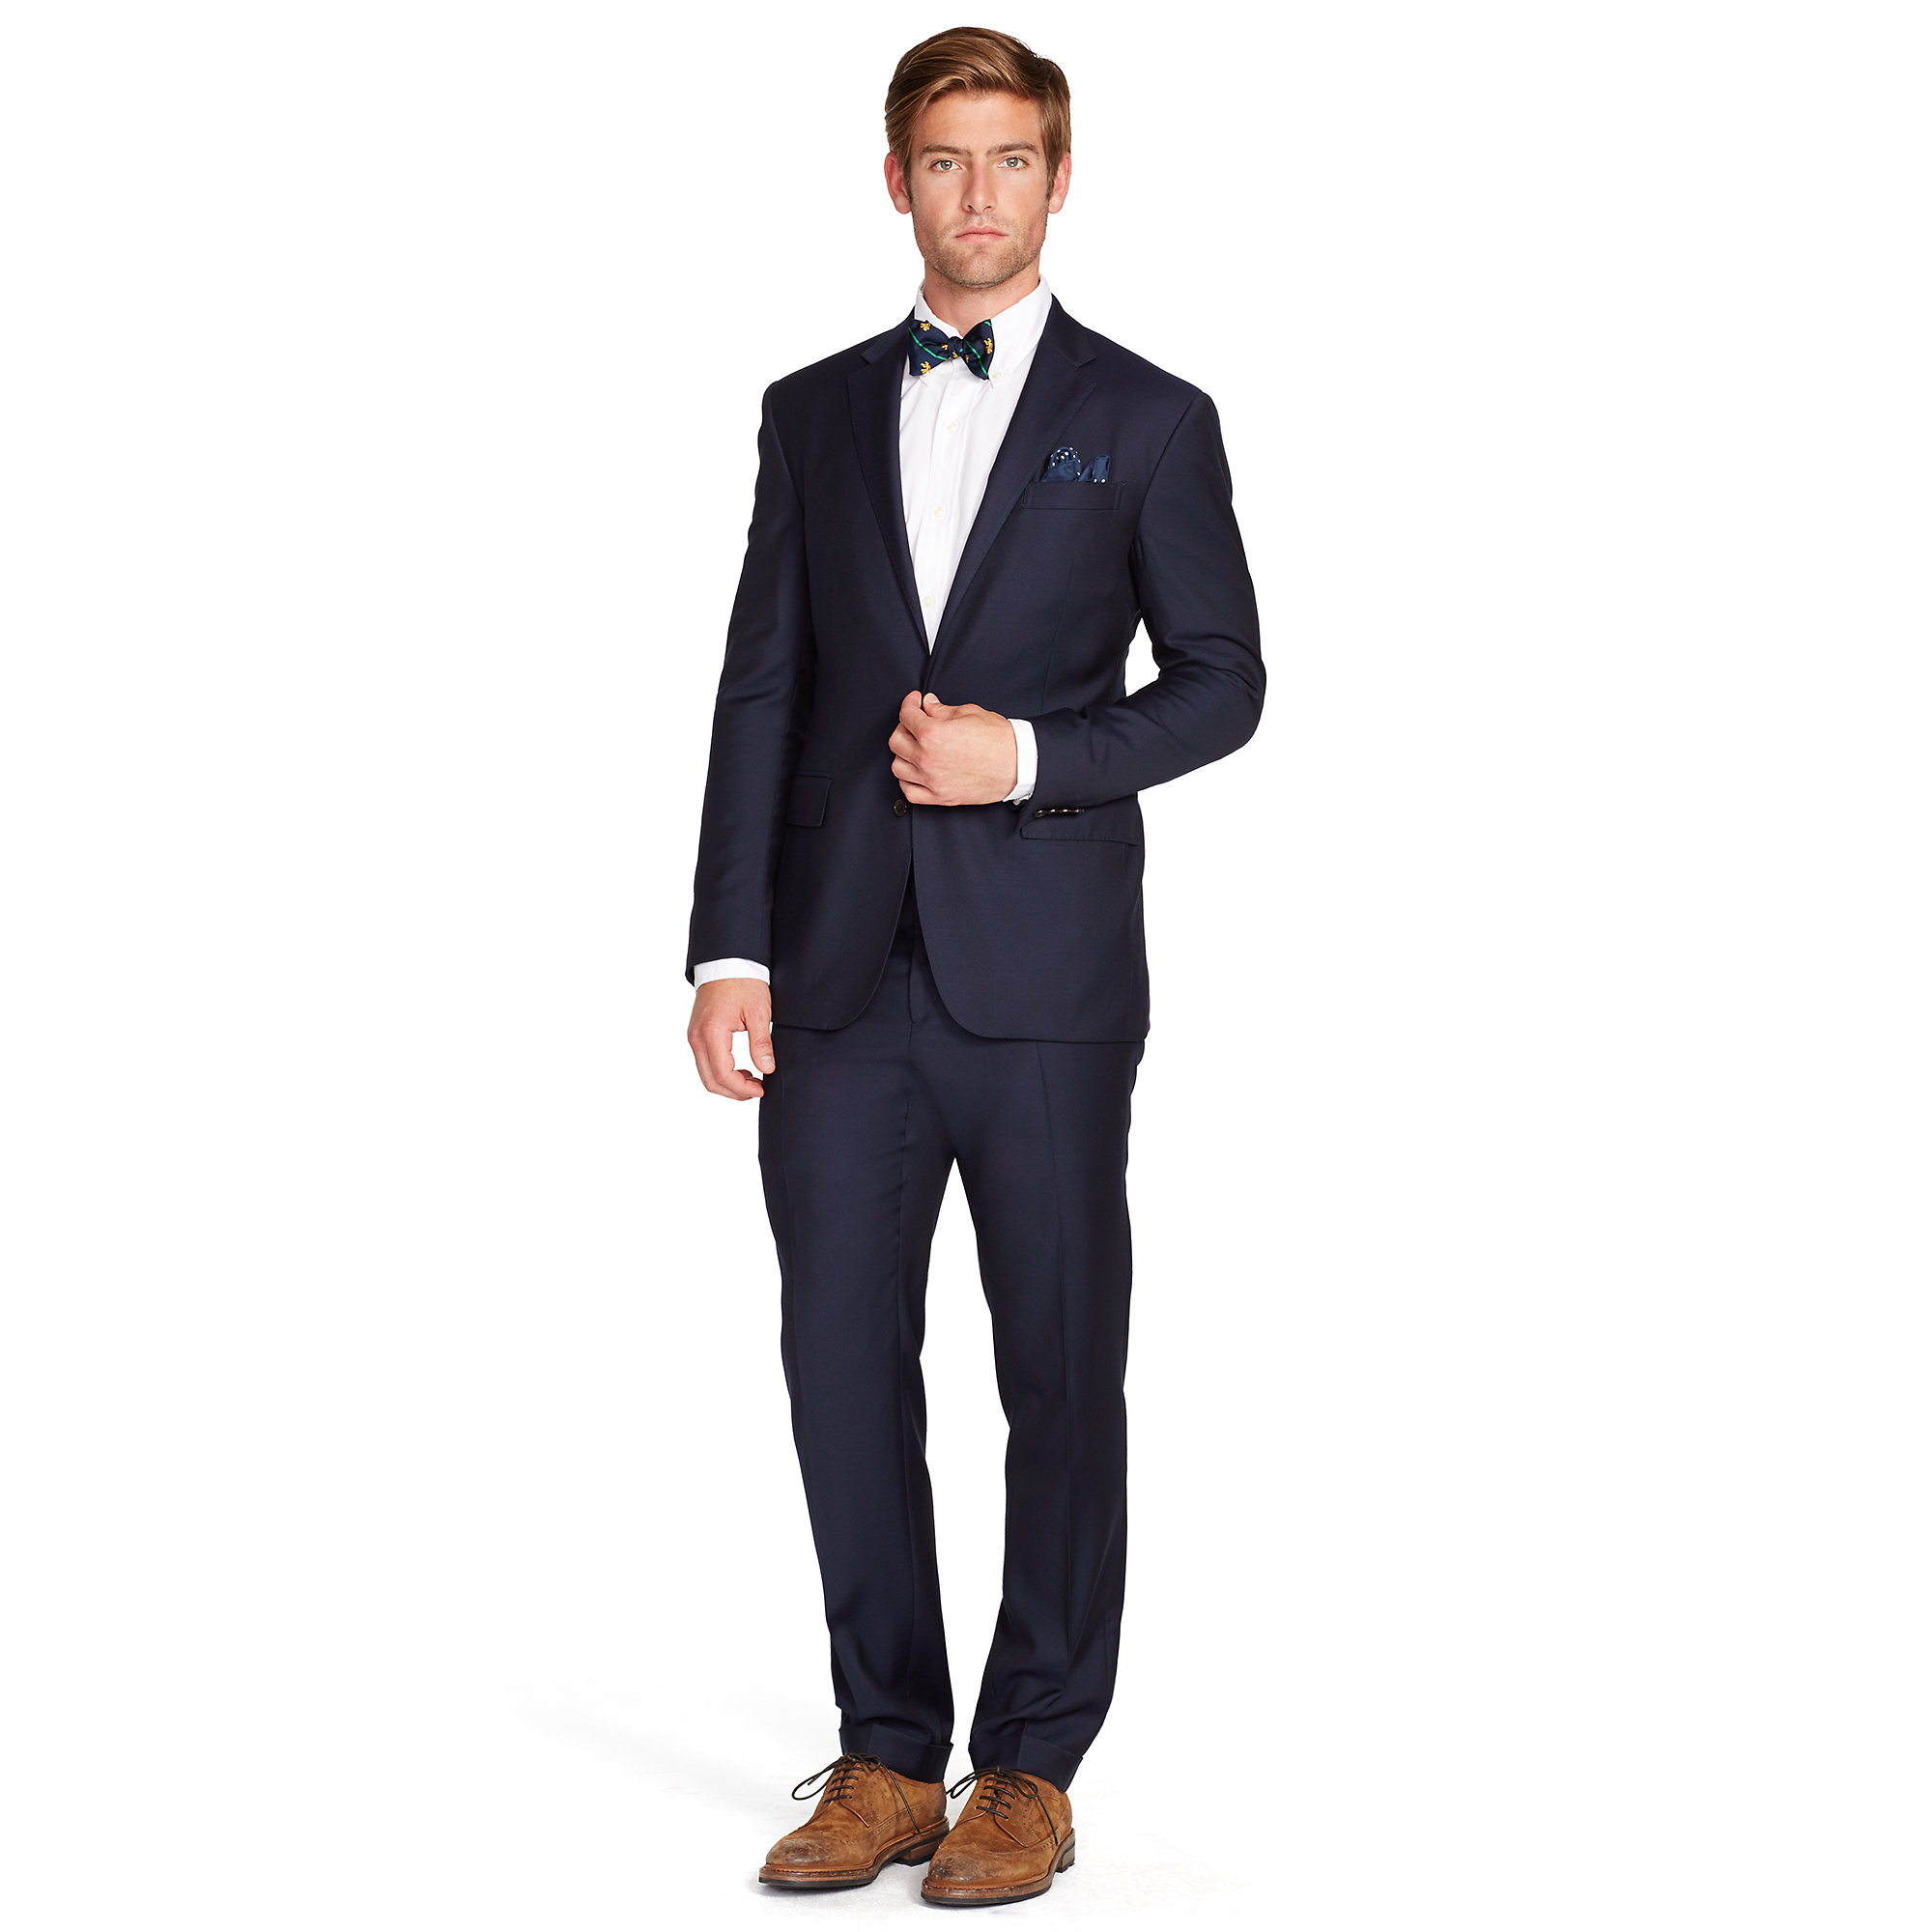 Lyst - Polo Ralph Lauren Polo I Wool Twill Suit in Blue for Men